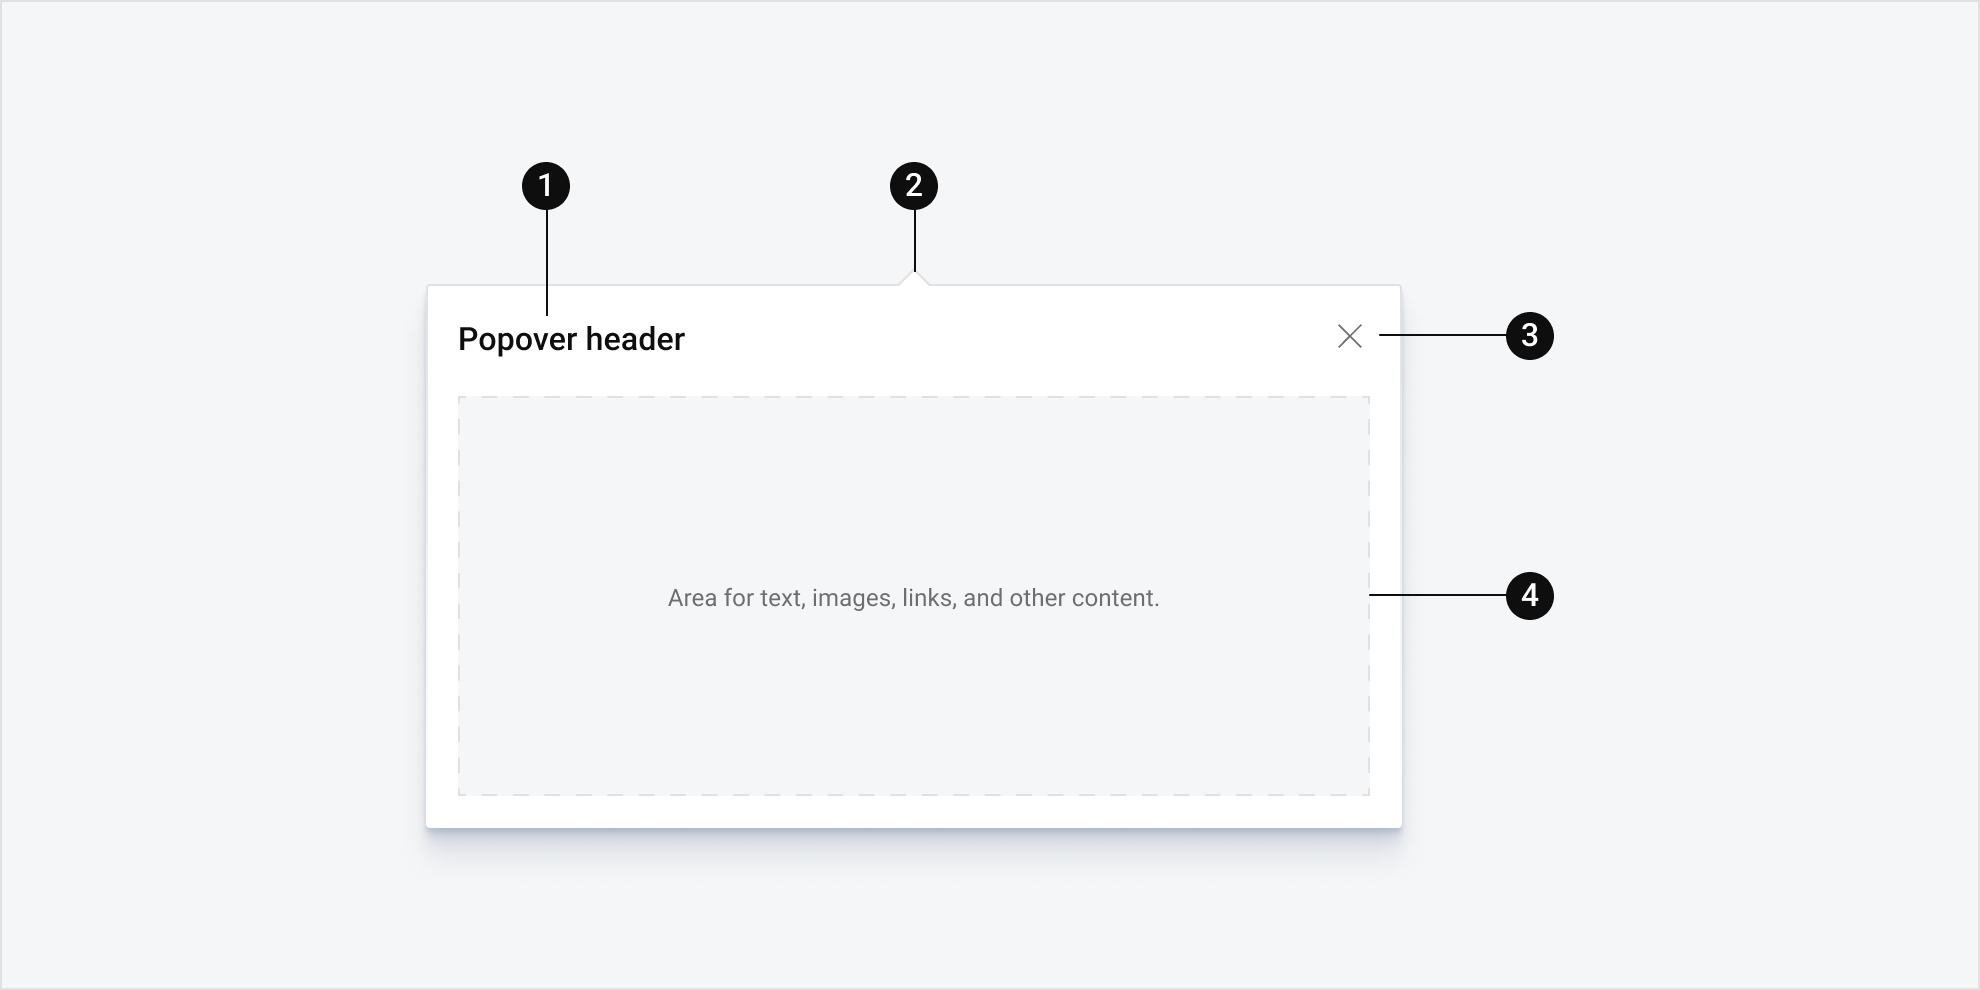 Alt text
The anatomy of popover, labeled 1 through 4.